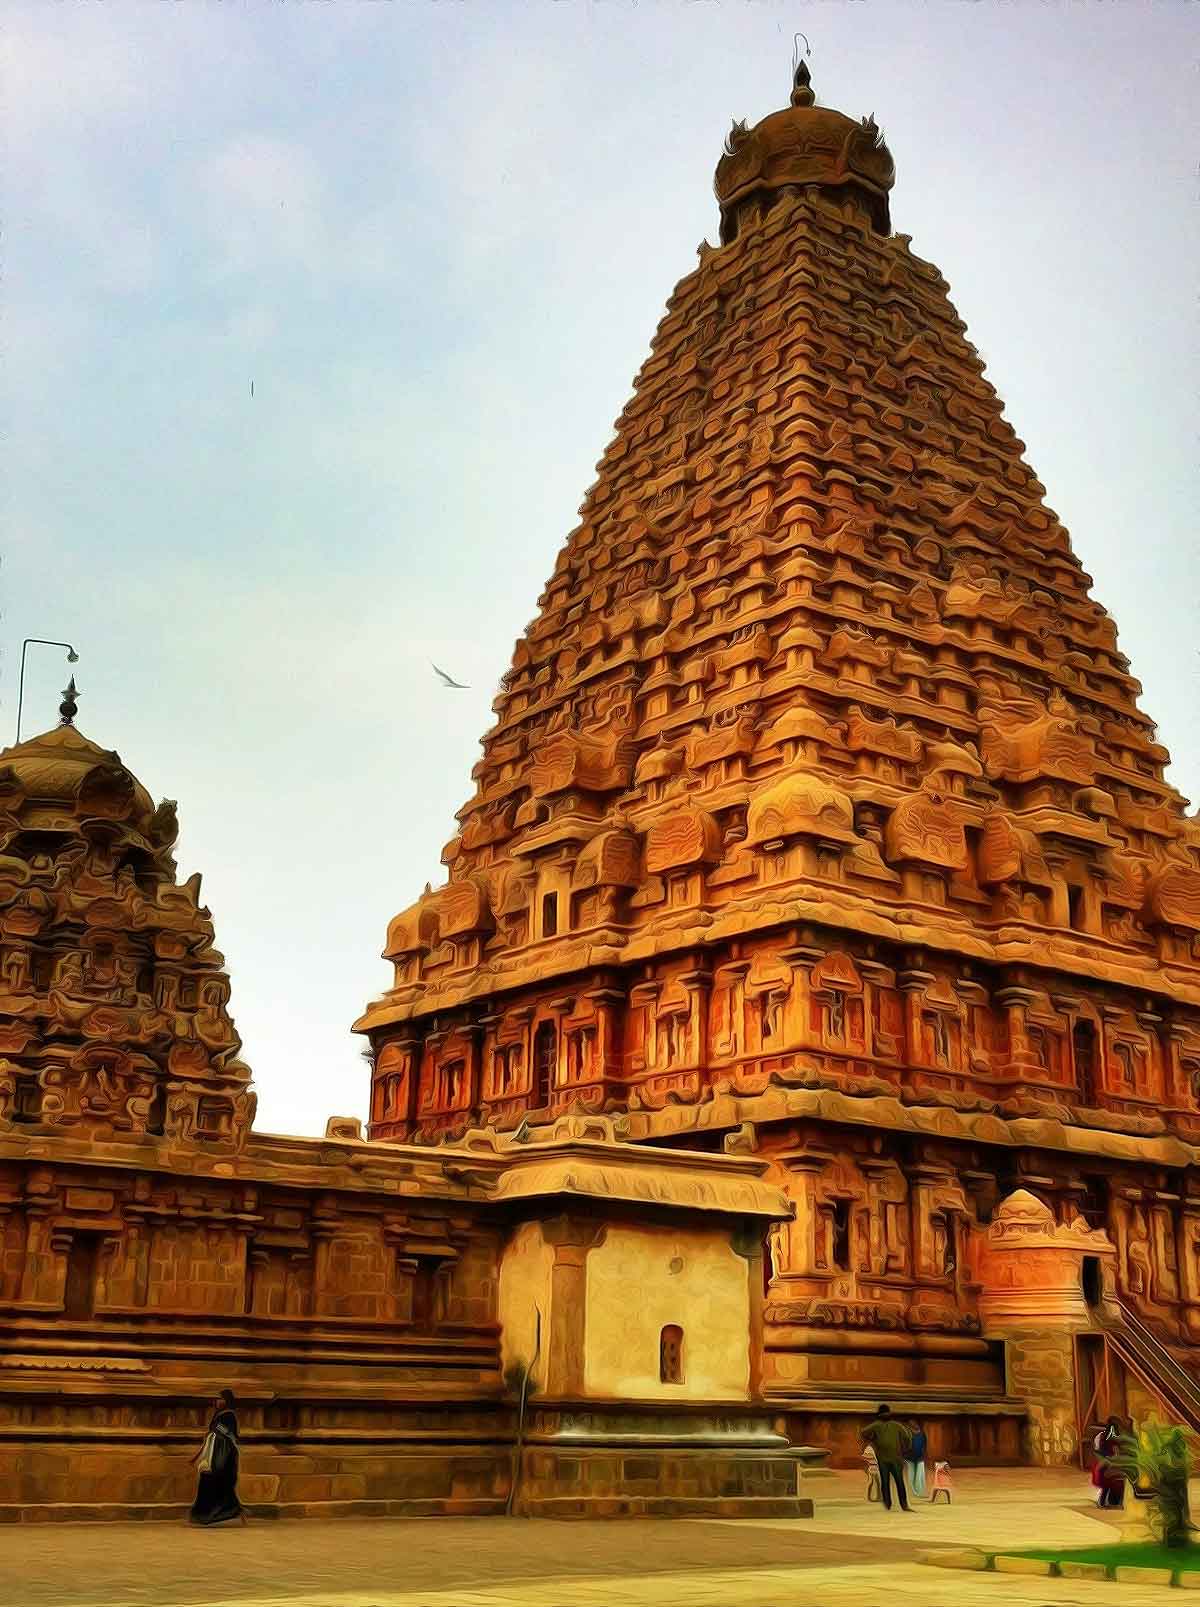 UNESCO World Heritage Site known as the "Great Living Chola Temples"